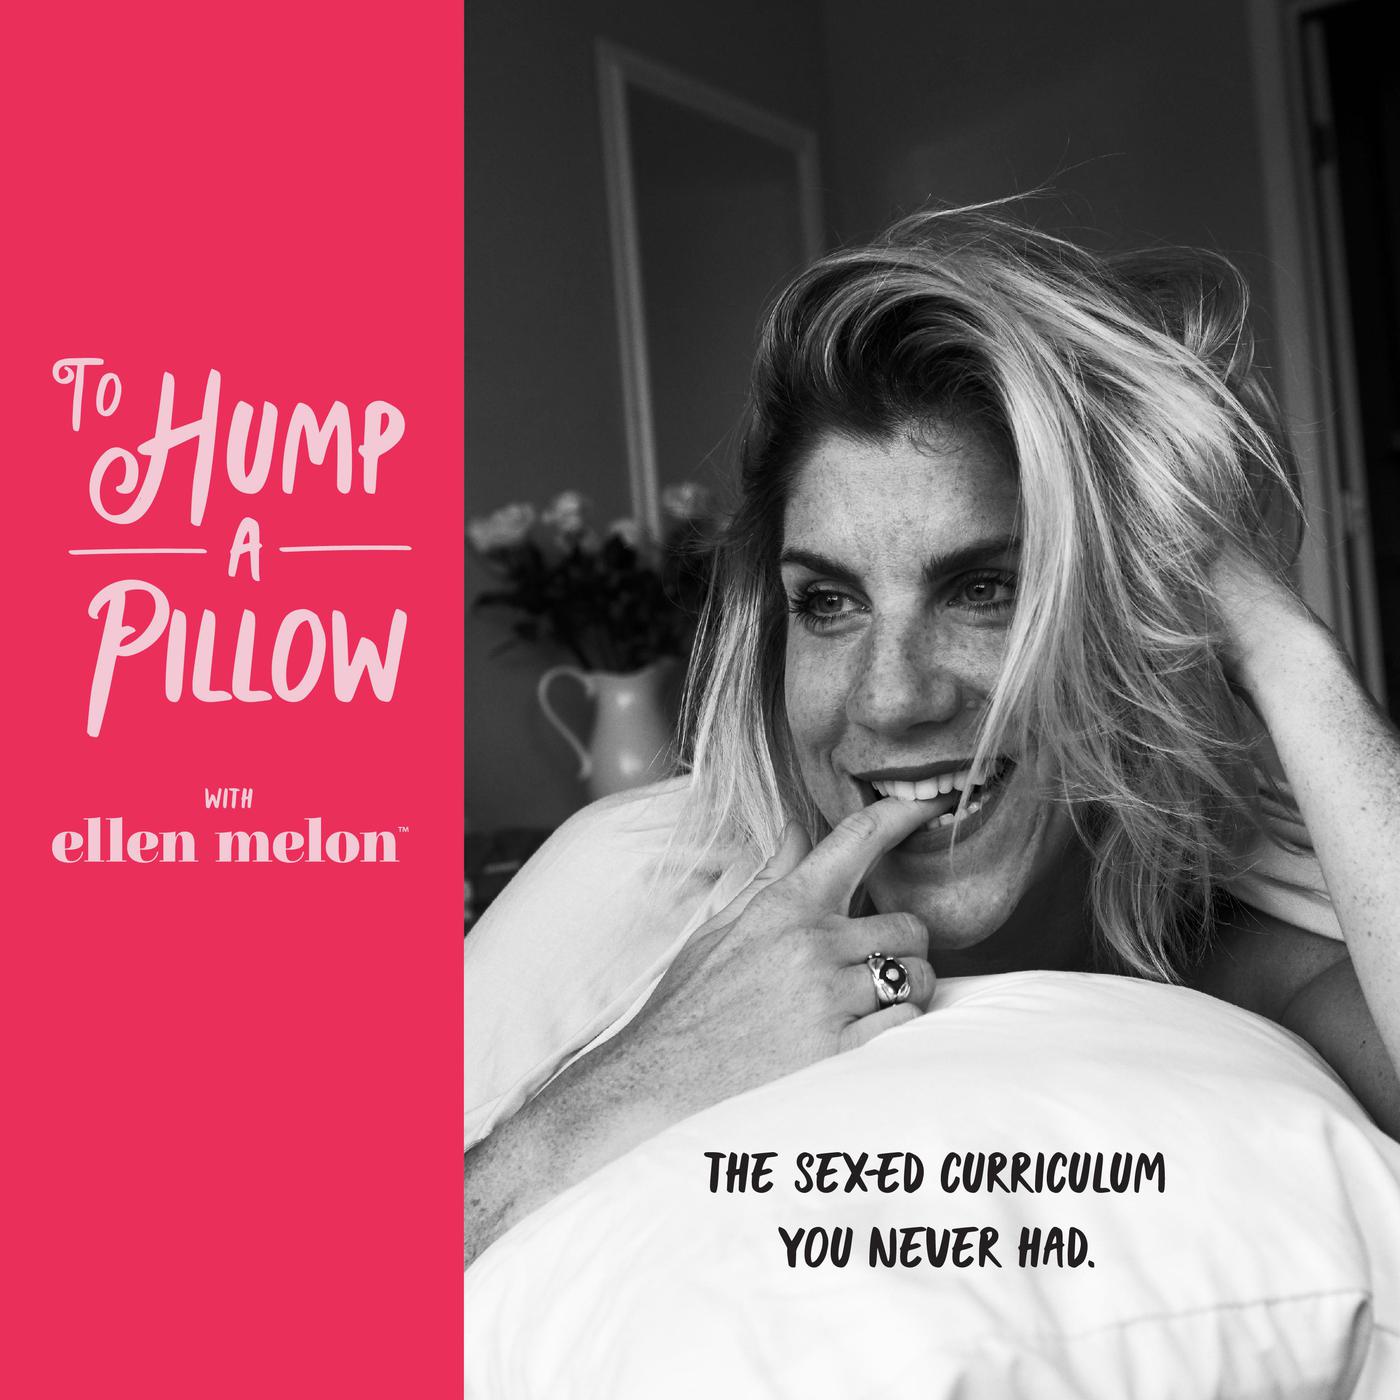 christine hallmark share how to hump a pillow step by step with pictures photos